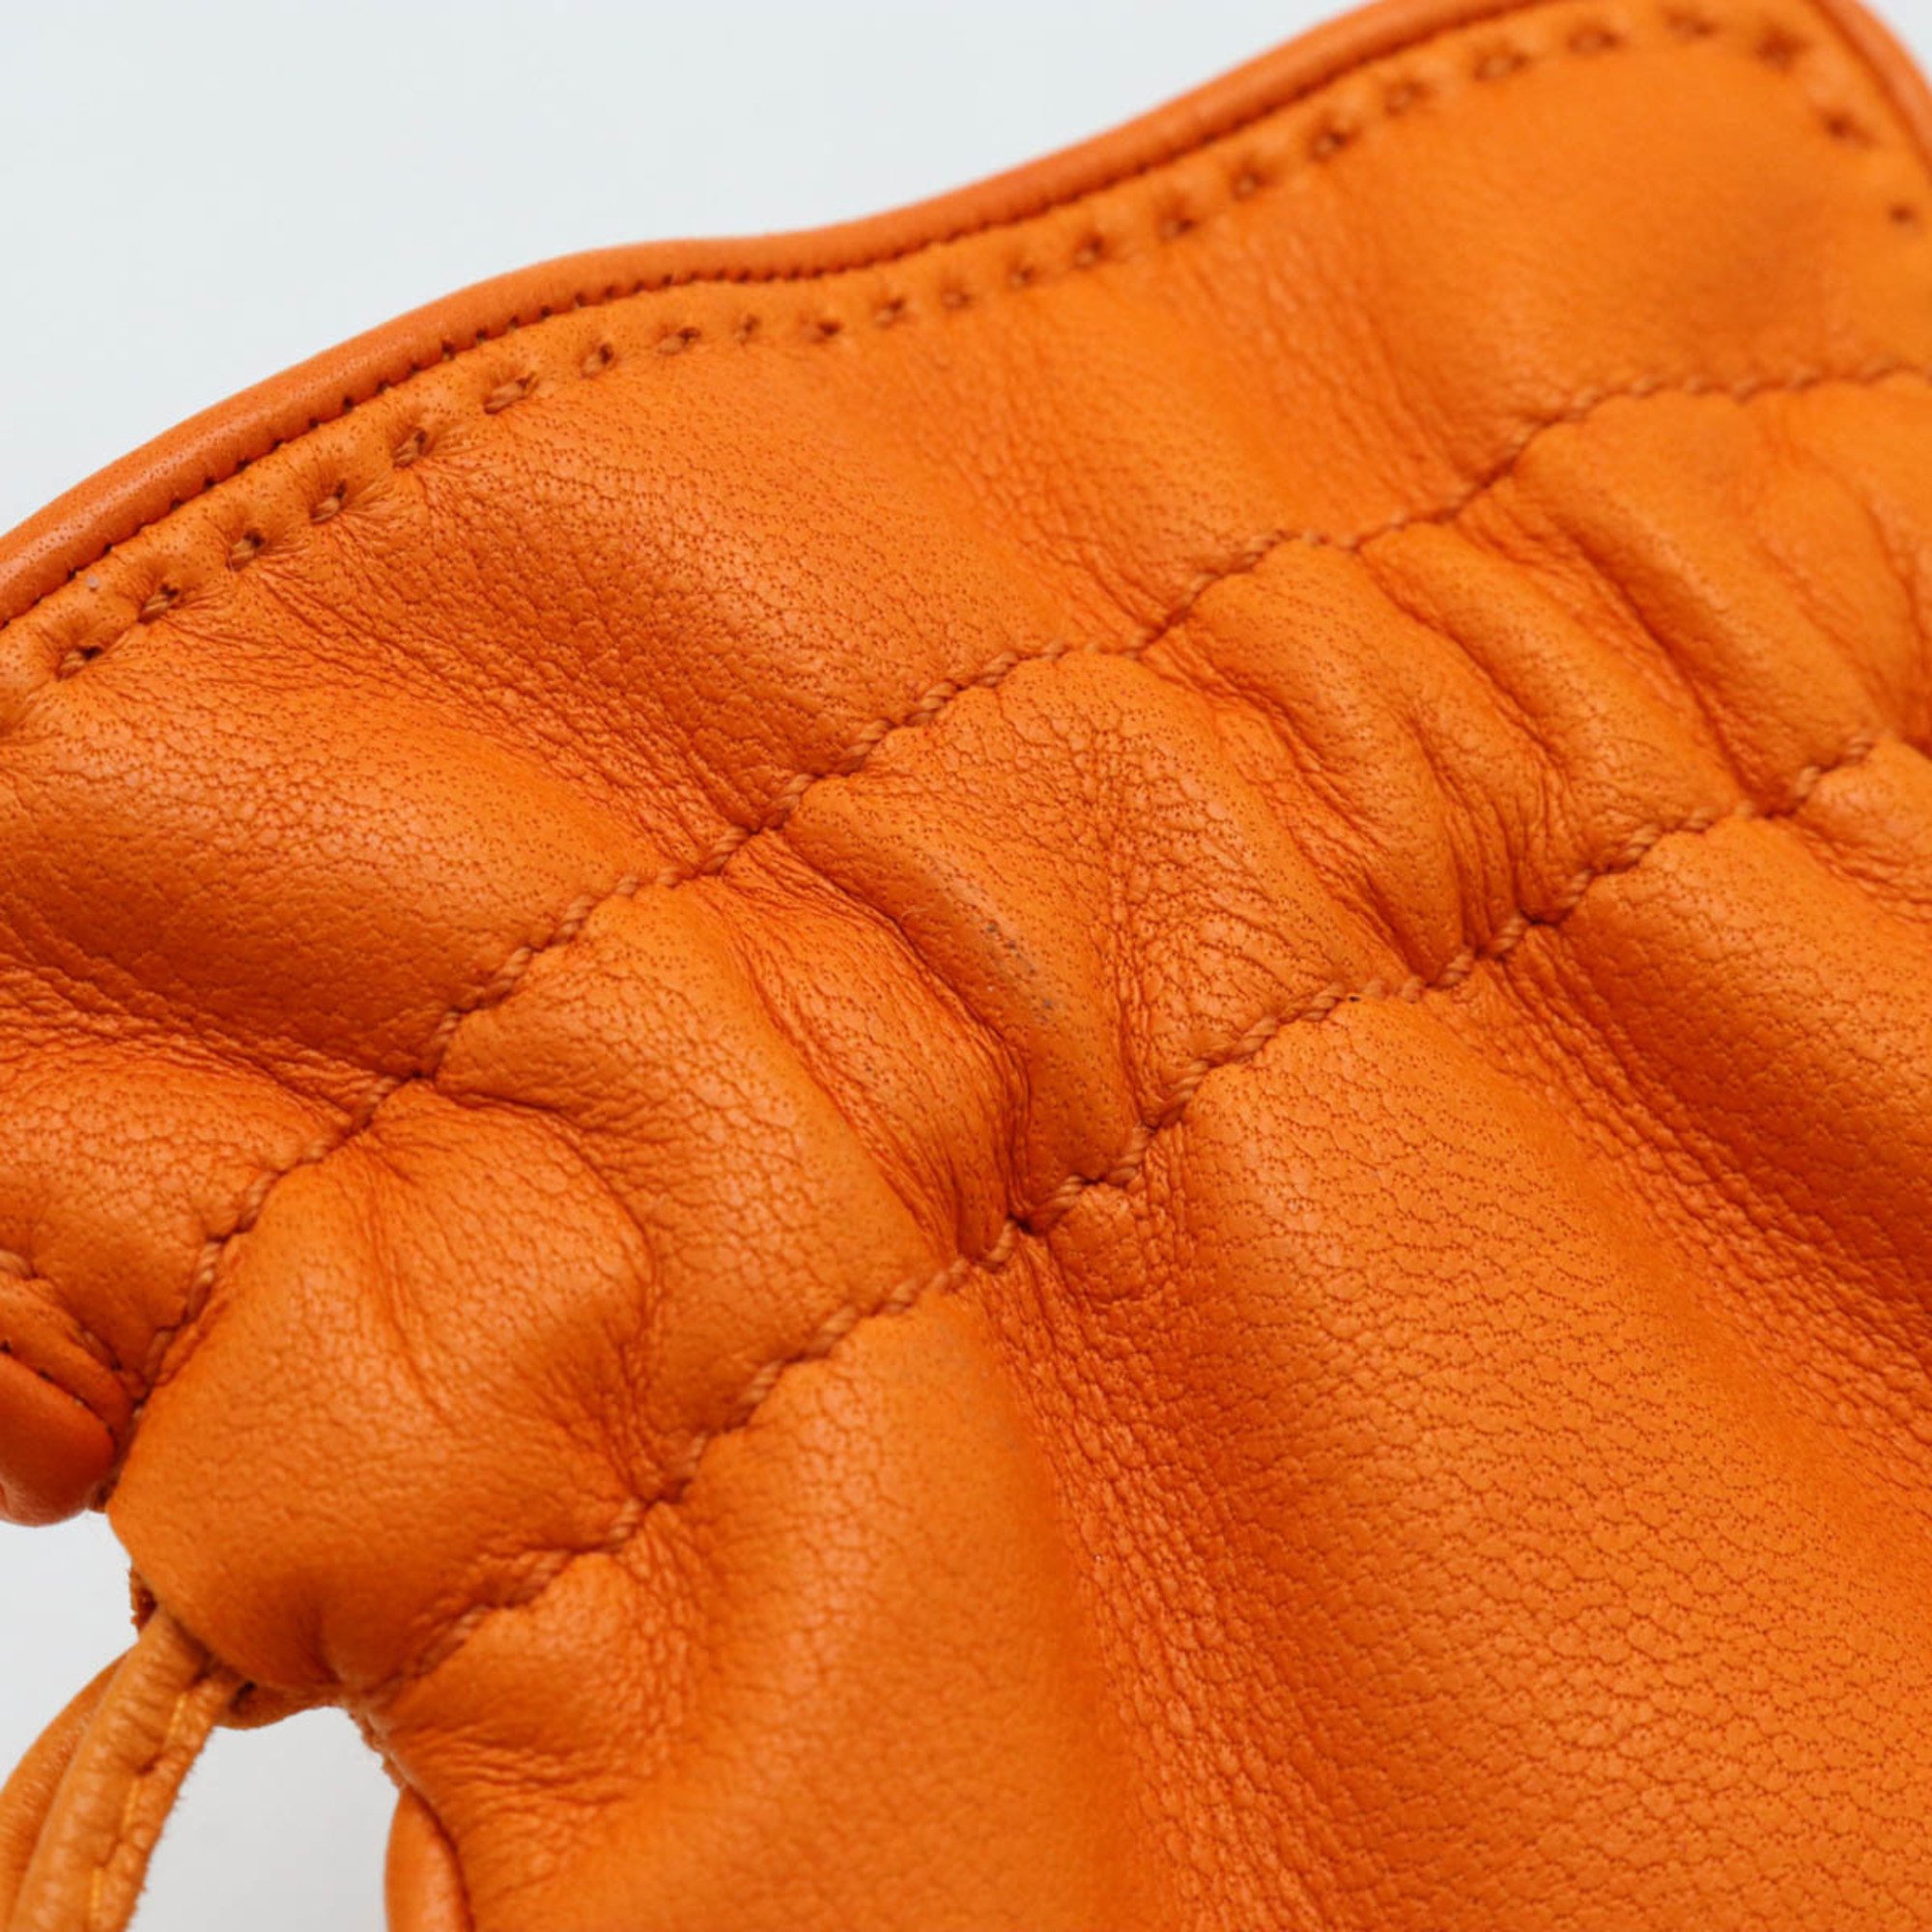 HERMES Hermes Pouch Leather Orange